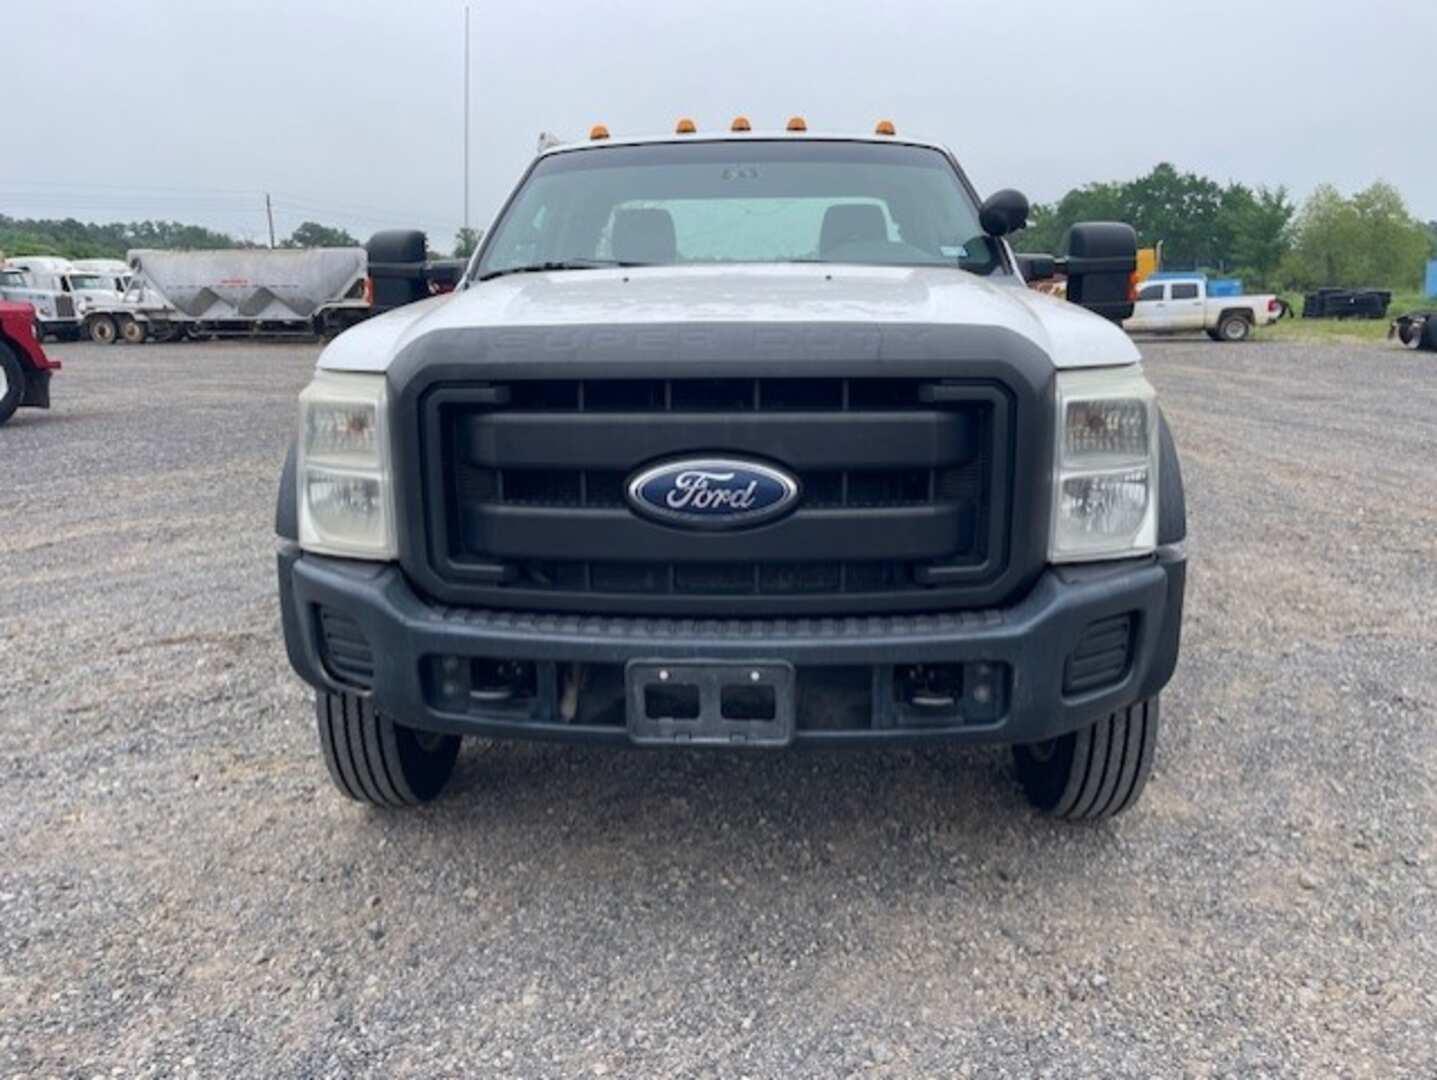 2012 FORD F-450 SERVICE TRUCK